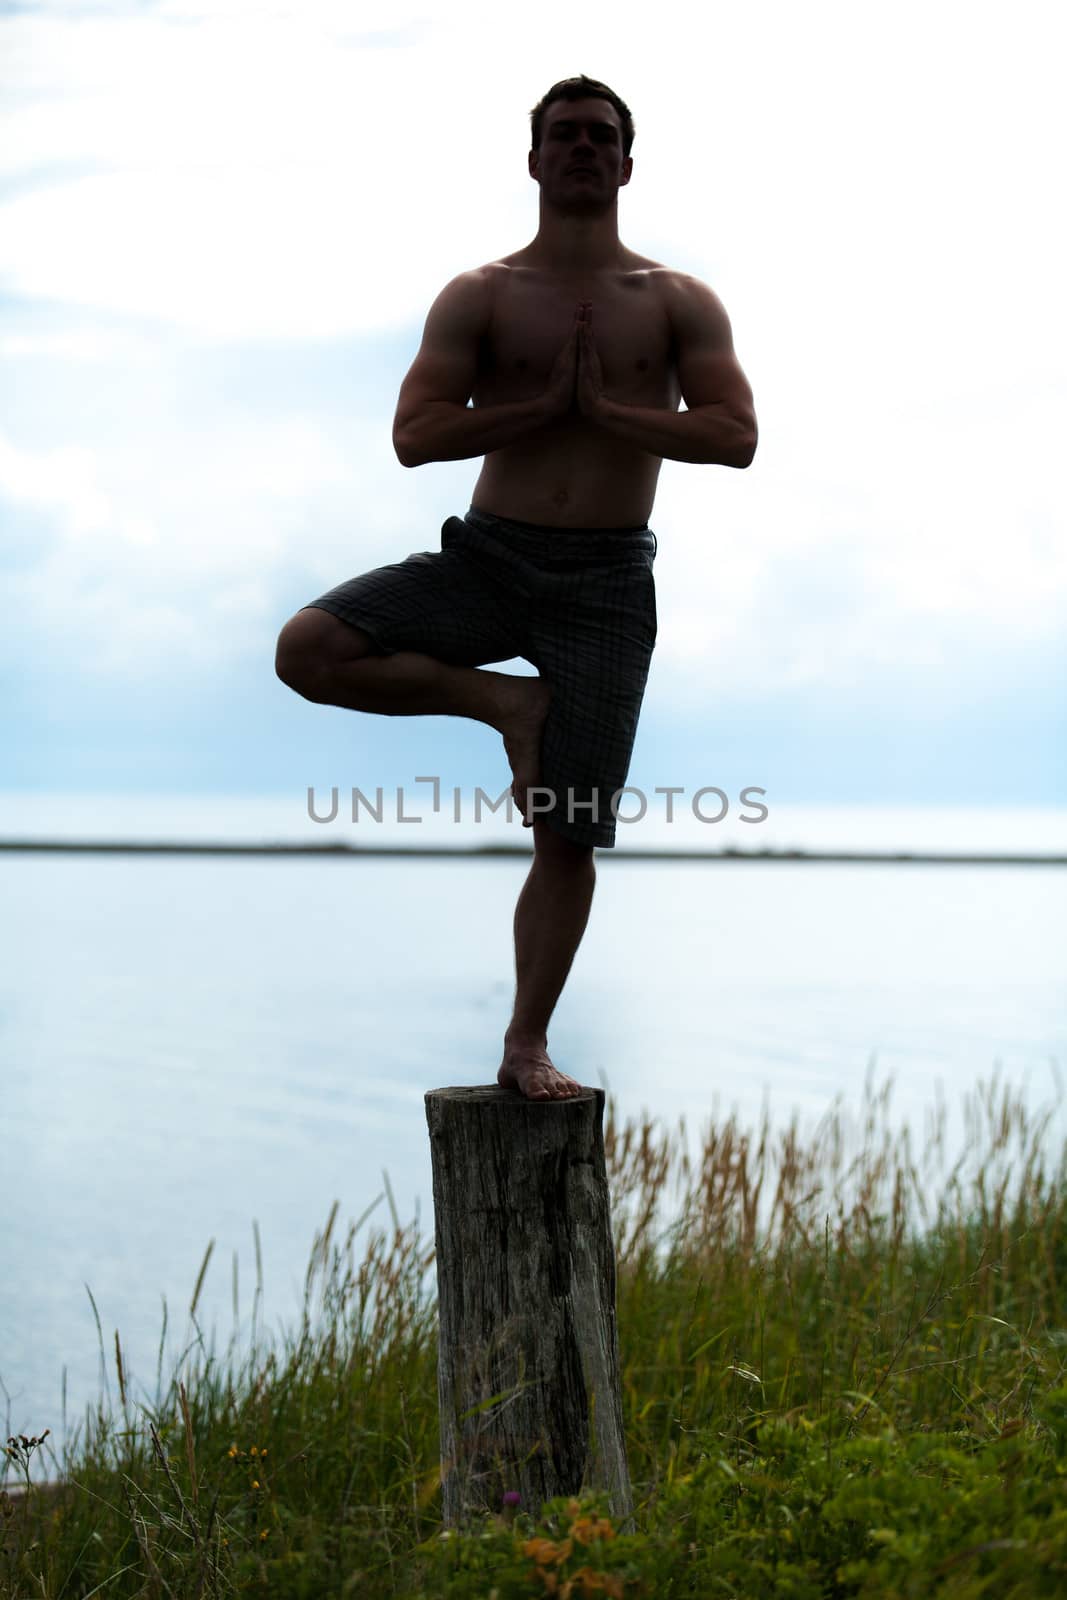 Man Silhouette Doing Yoga on a Stump in Nature by aetb